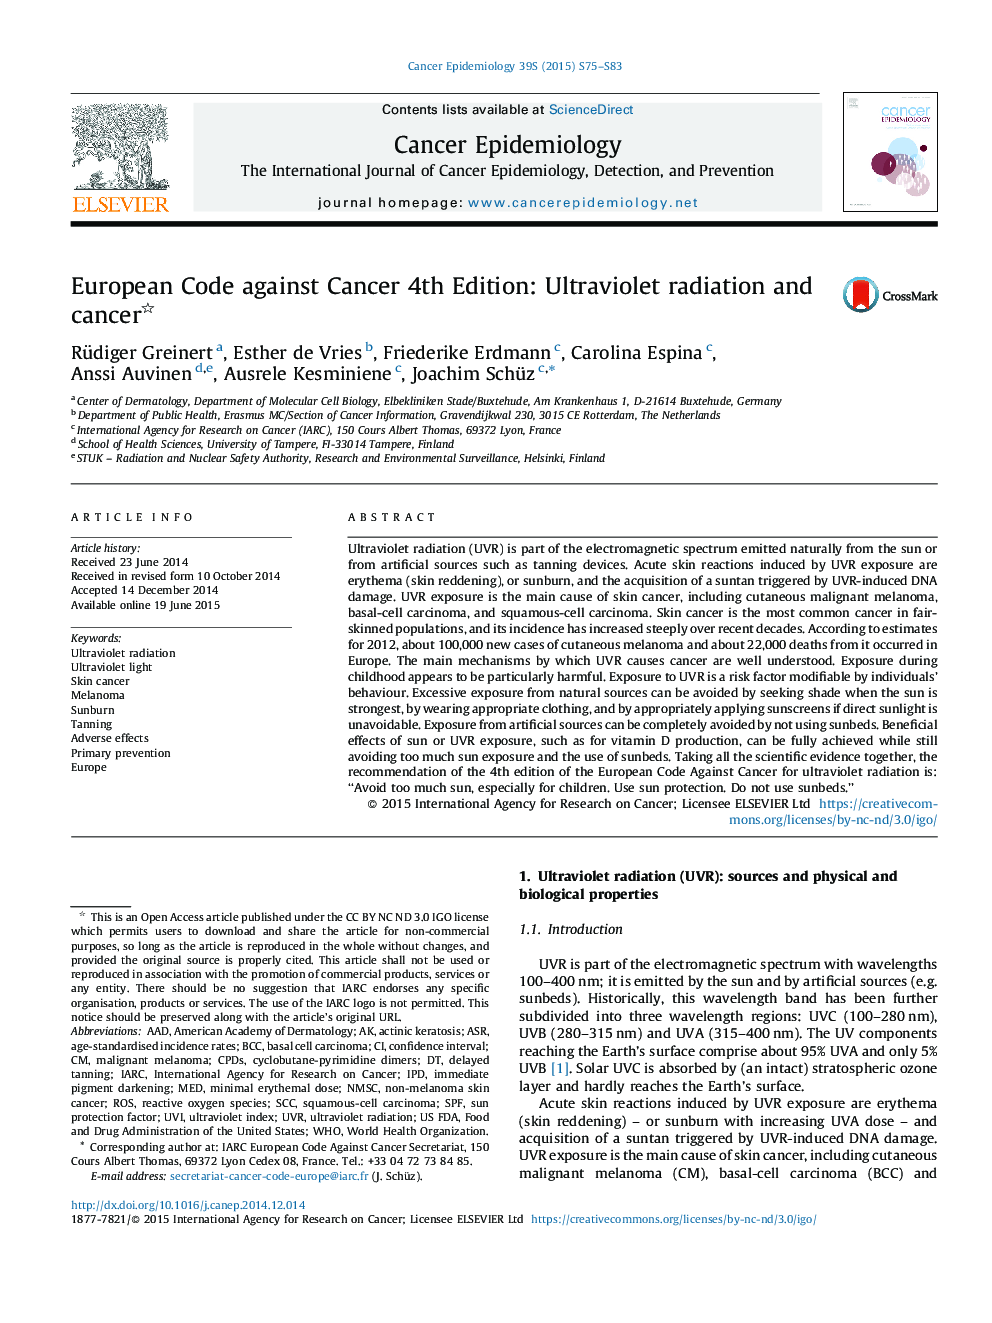 European Code against Cancer 4th Edition: Ultraviolet radiation and cancer 